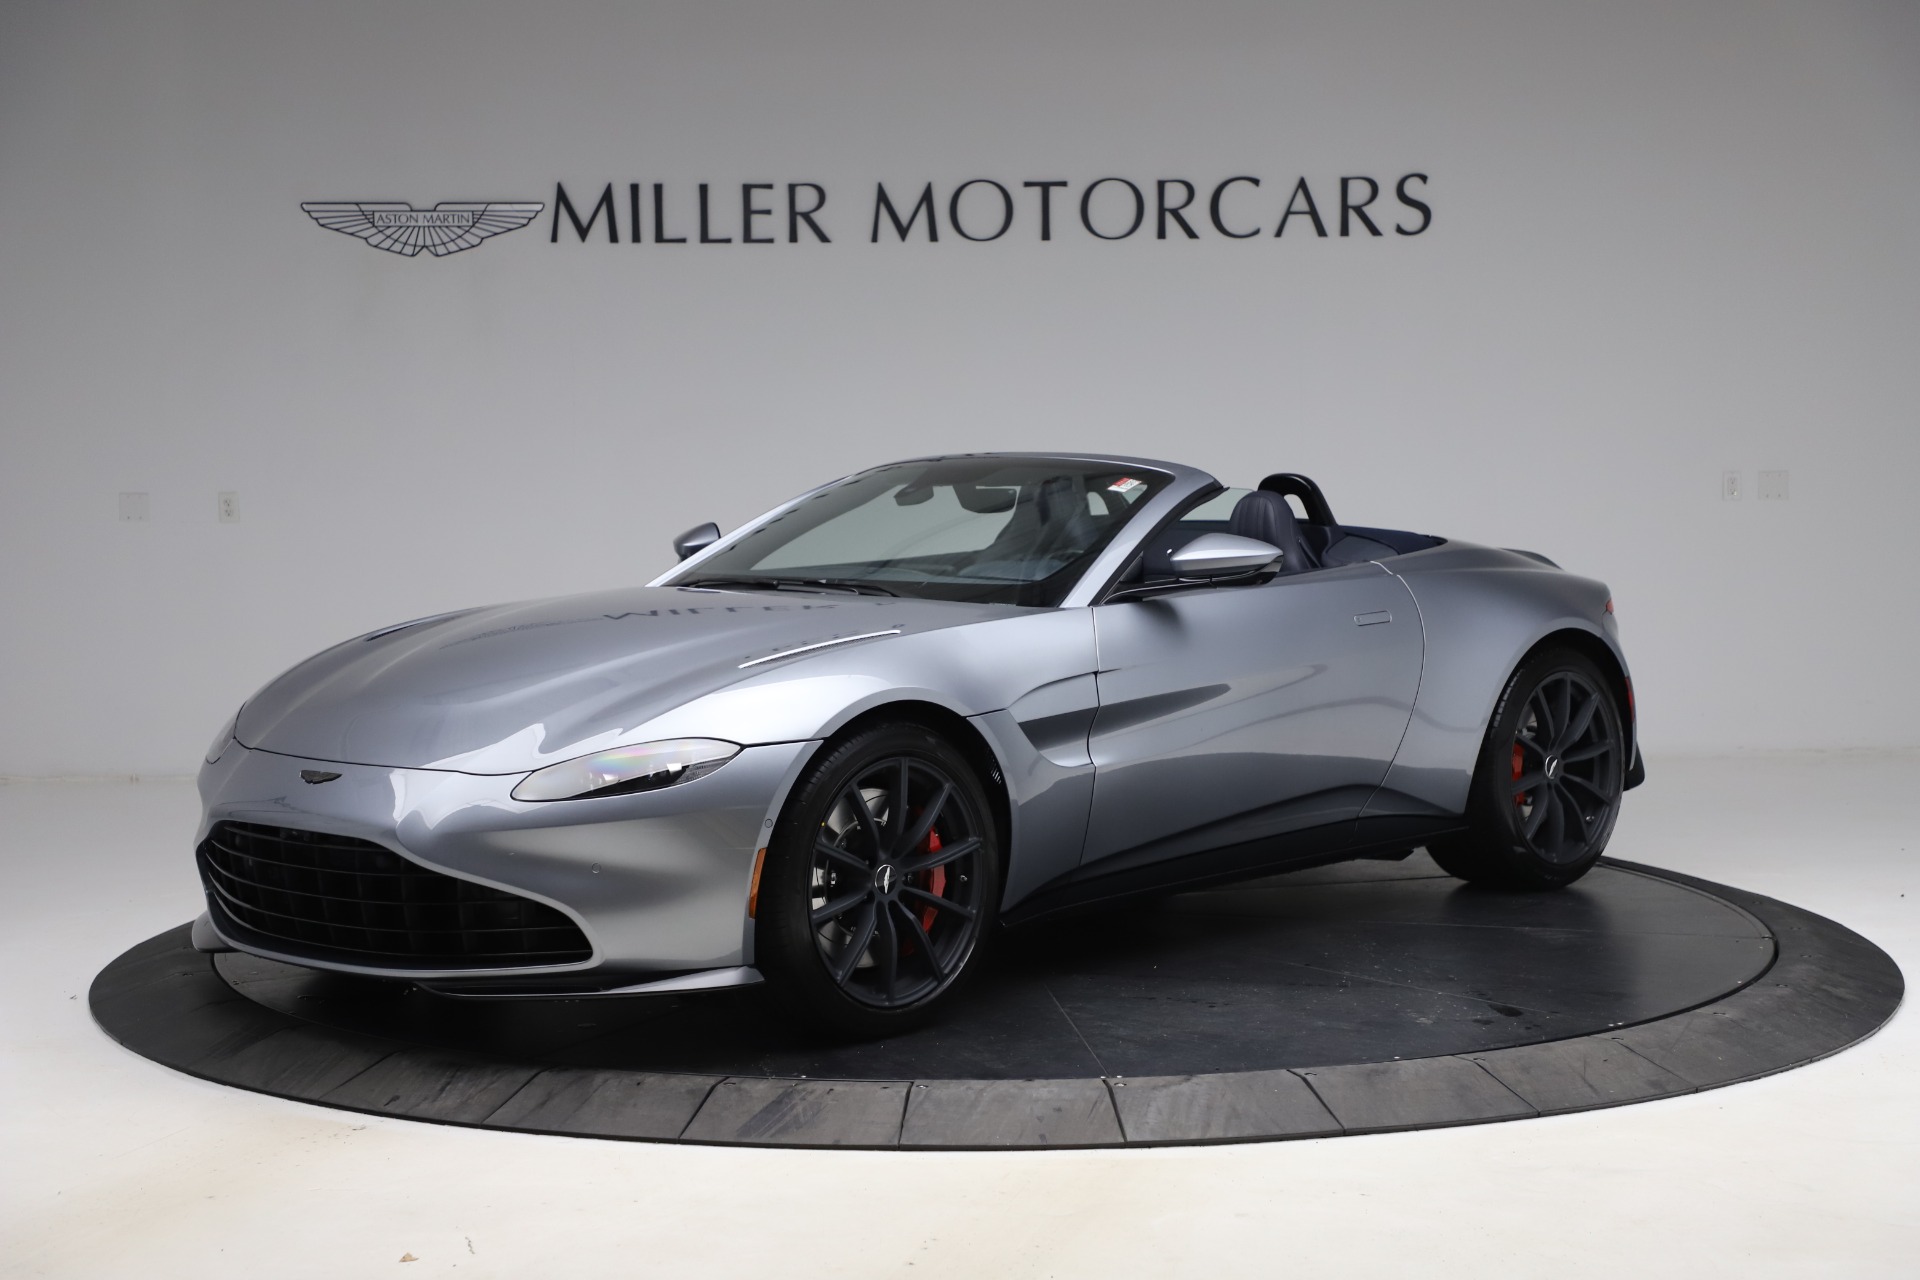 New 2021 Aston Martin Vantage Roadster for sale Sold at Maserati of Greenwich in Greenwich CT 06830 1